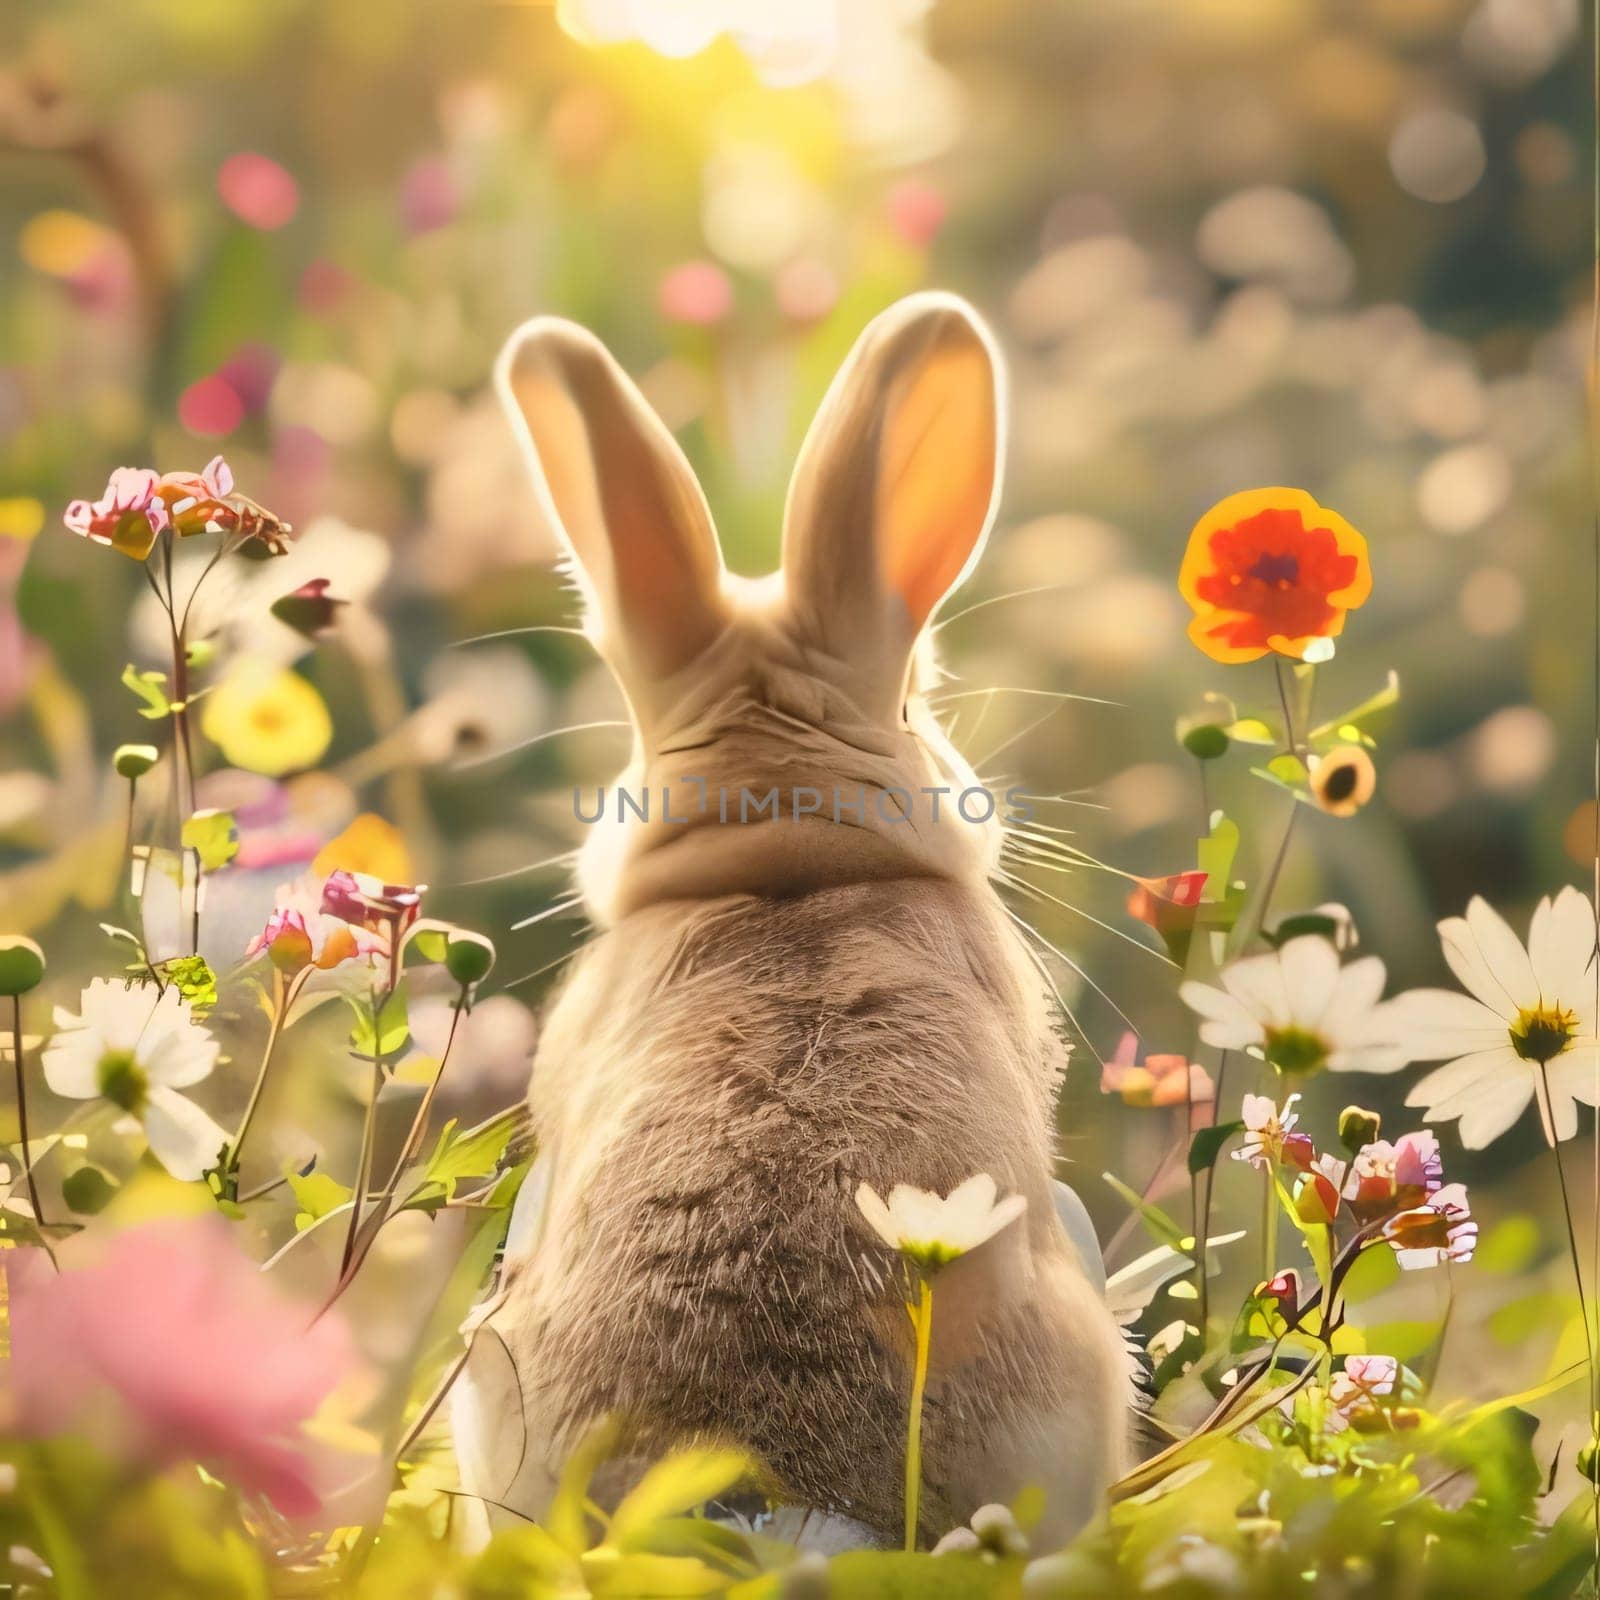 A little bunny sitting in the middle of colorful flowers in a meadow. Flowering flowers, a symbol of spring, new life. A joyful time of nature awakening to life.